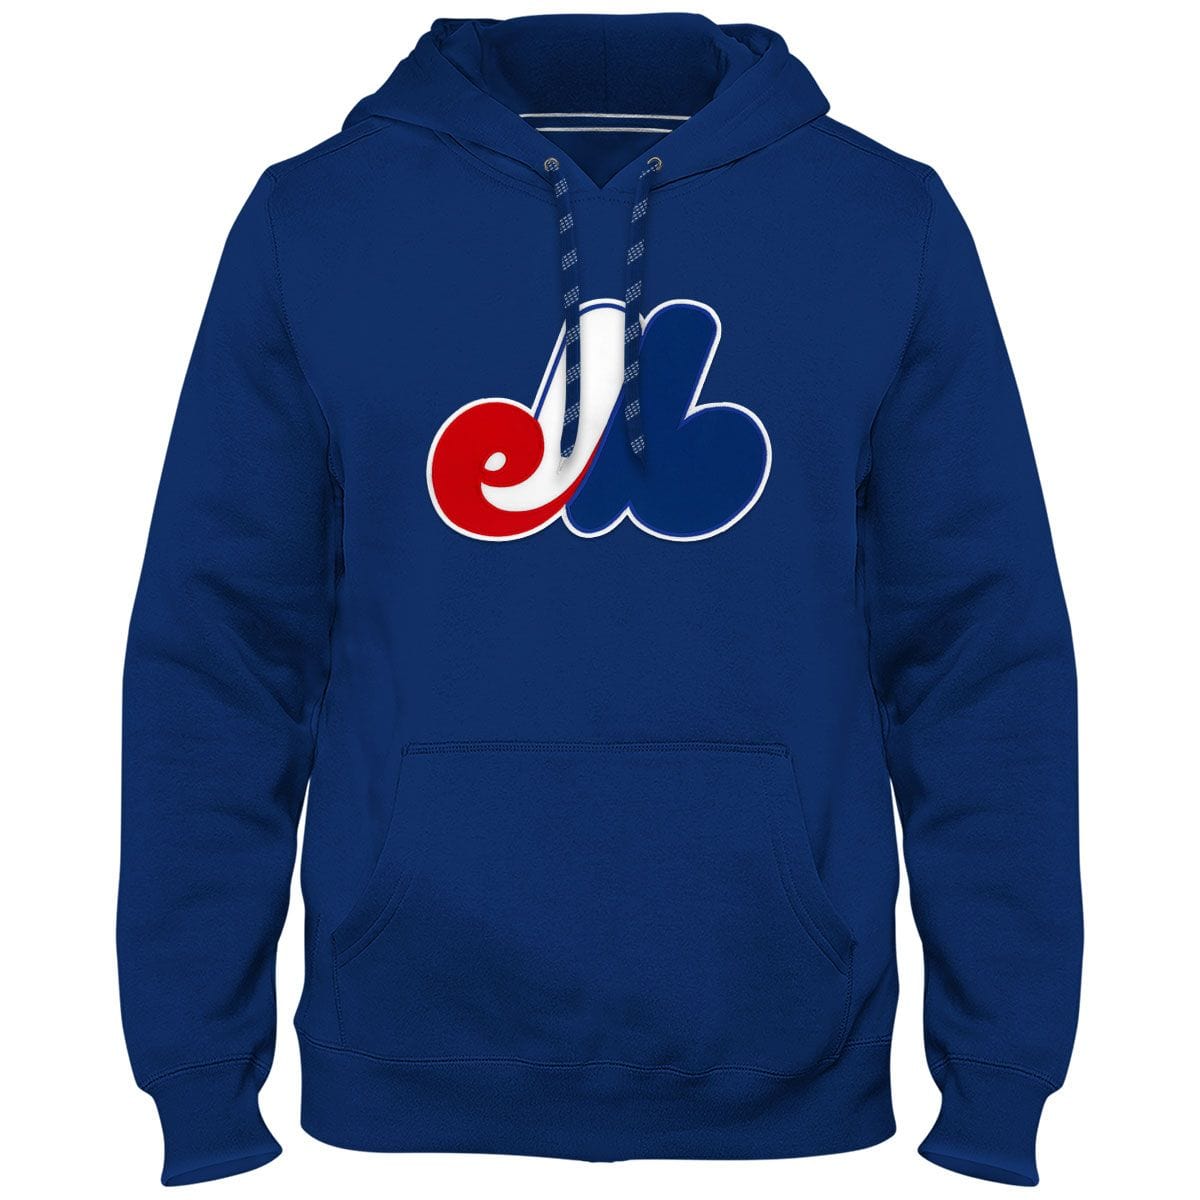 Men's Nike Royal/Light Blue Montreal Expos Cooperstown Collection